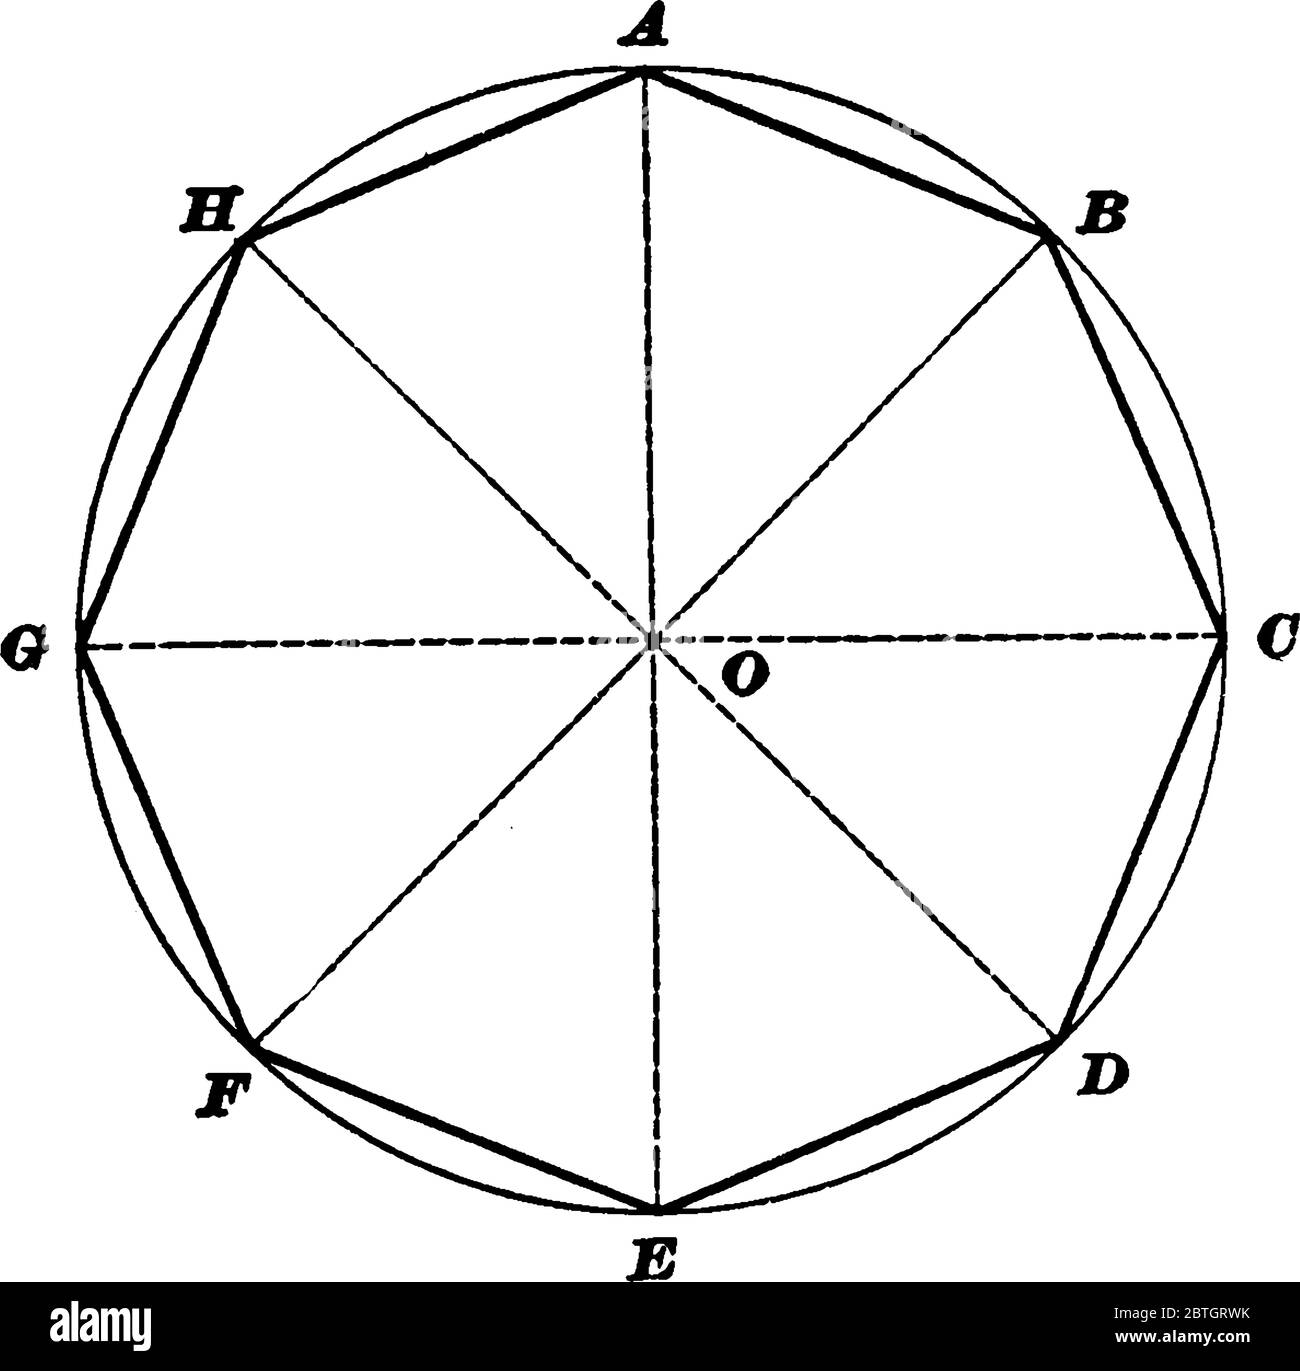 How To Draw A Octagon